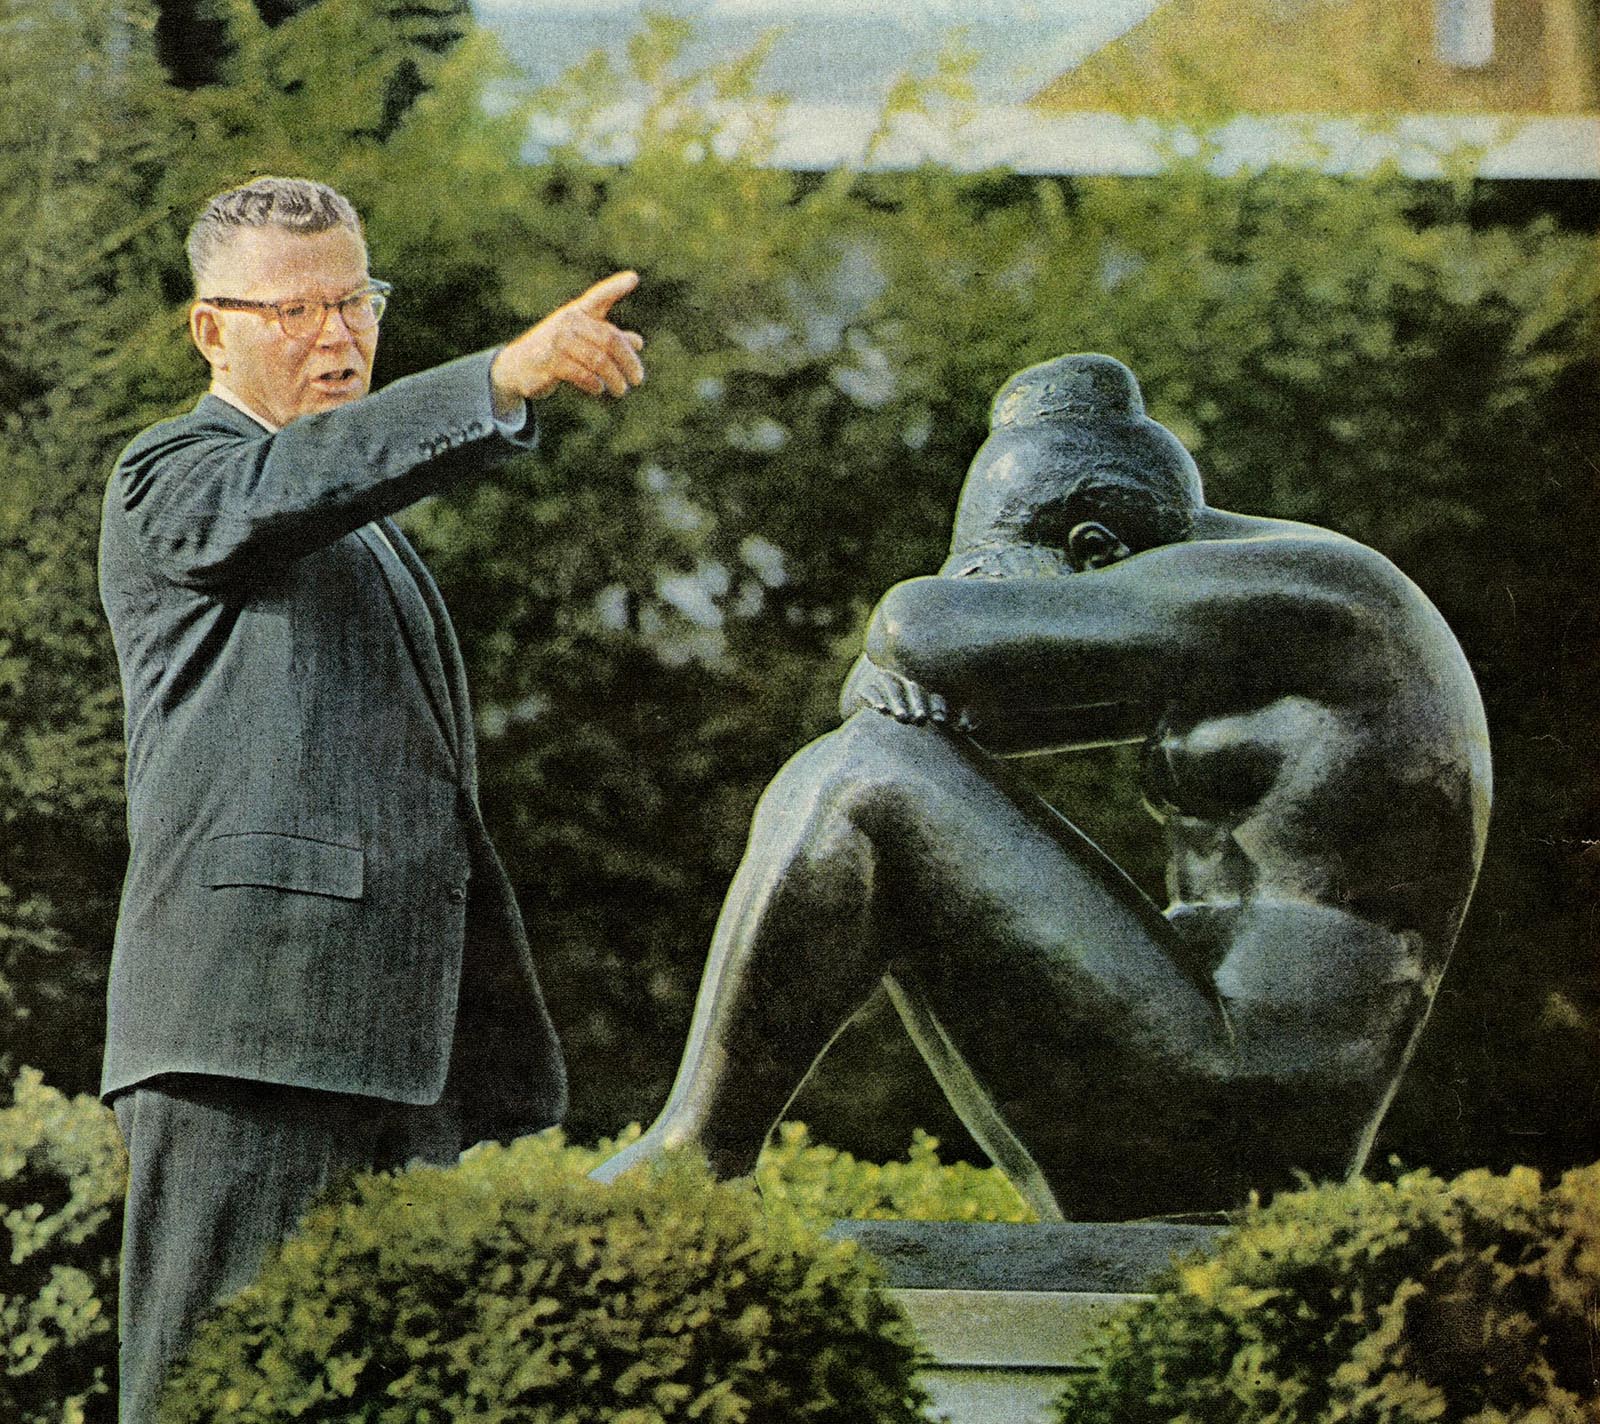 Guy pointing over a statue